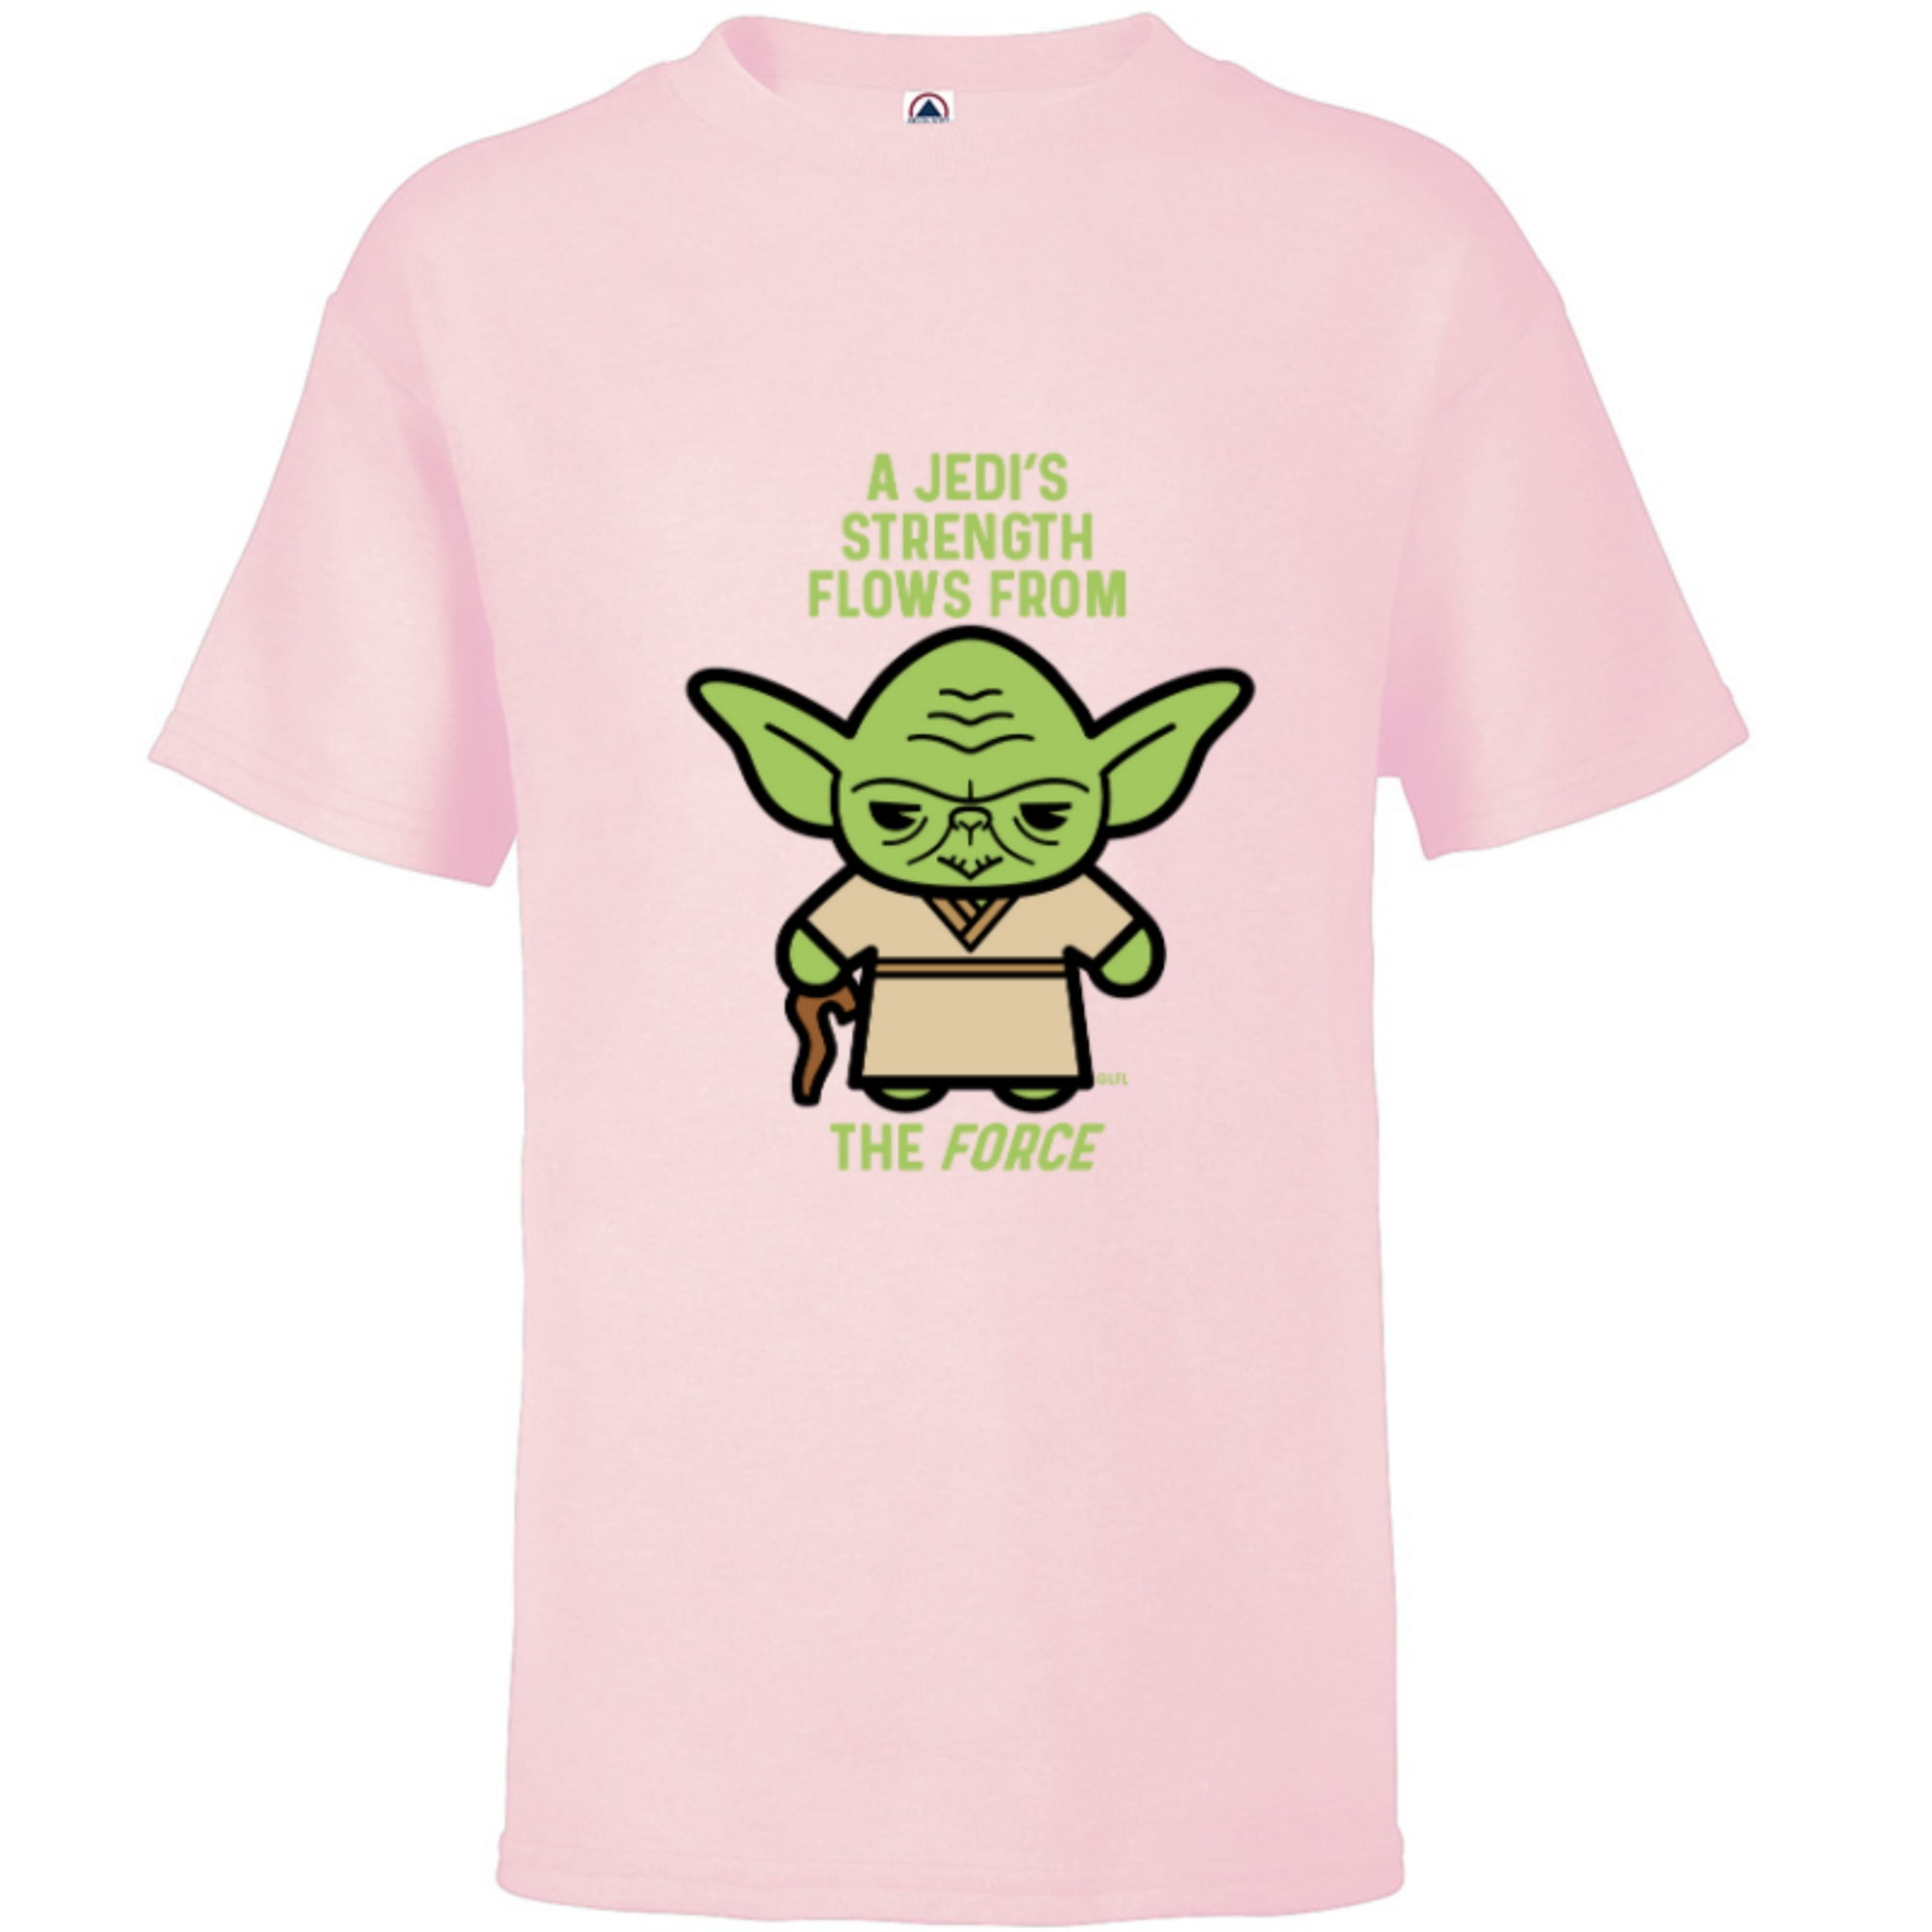 Star Wars Yoda Quote A Jedi's Strength Flows from the Force